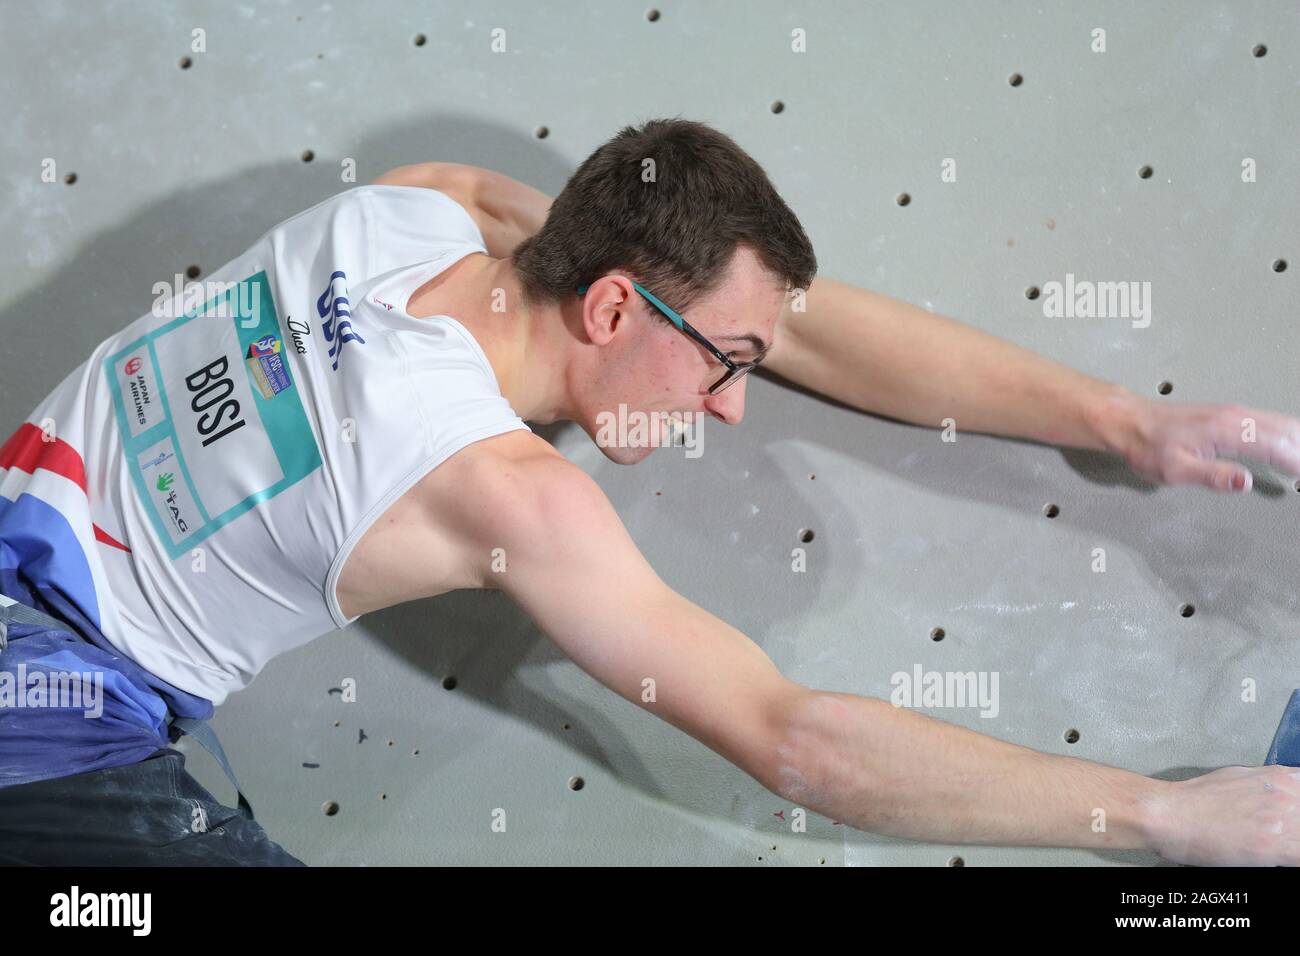 TOULOUSE, FRANCE - 28 NOV 2019: William Bosi during the Men's Bouldering Qualification of the Sports Climbing Combined Olympic Qualification Tournament in Toulouse, France (Photo Credit: Mickael Chavet) Stock Photo